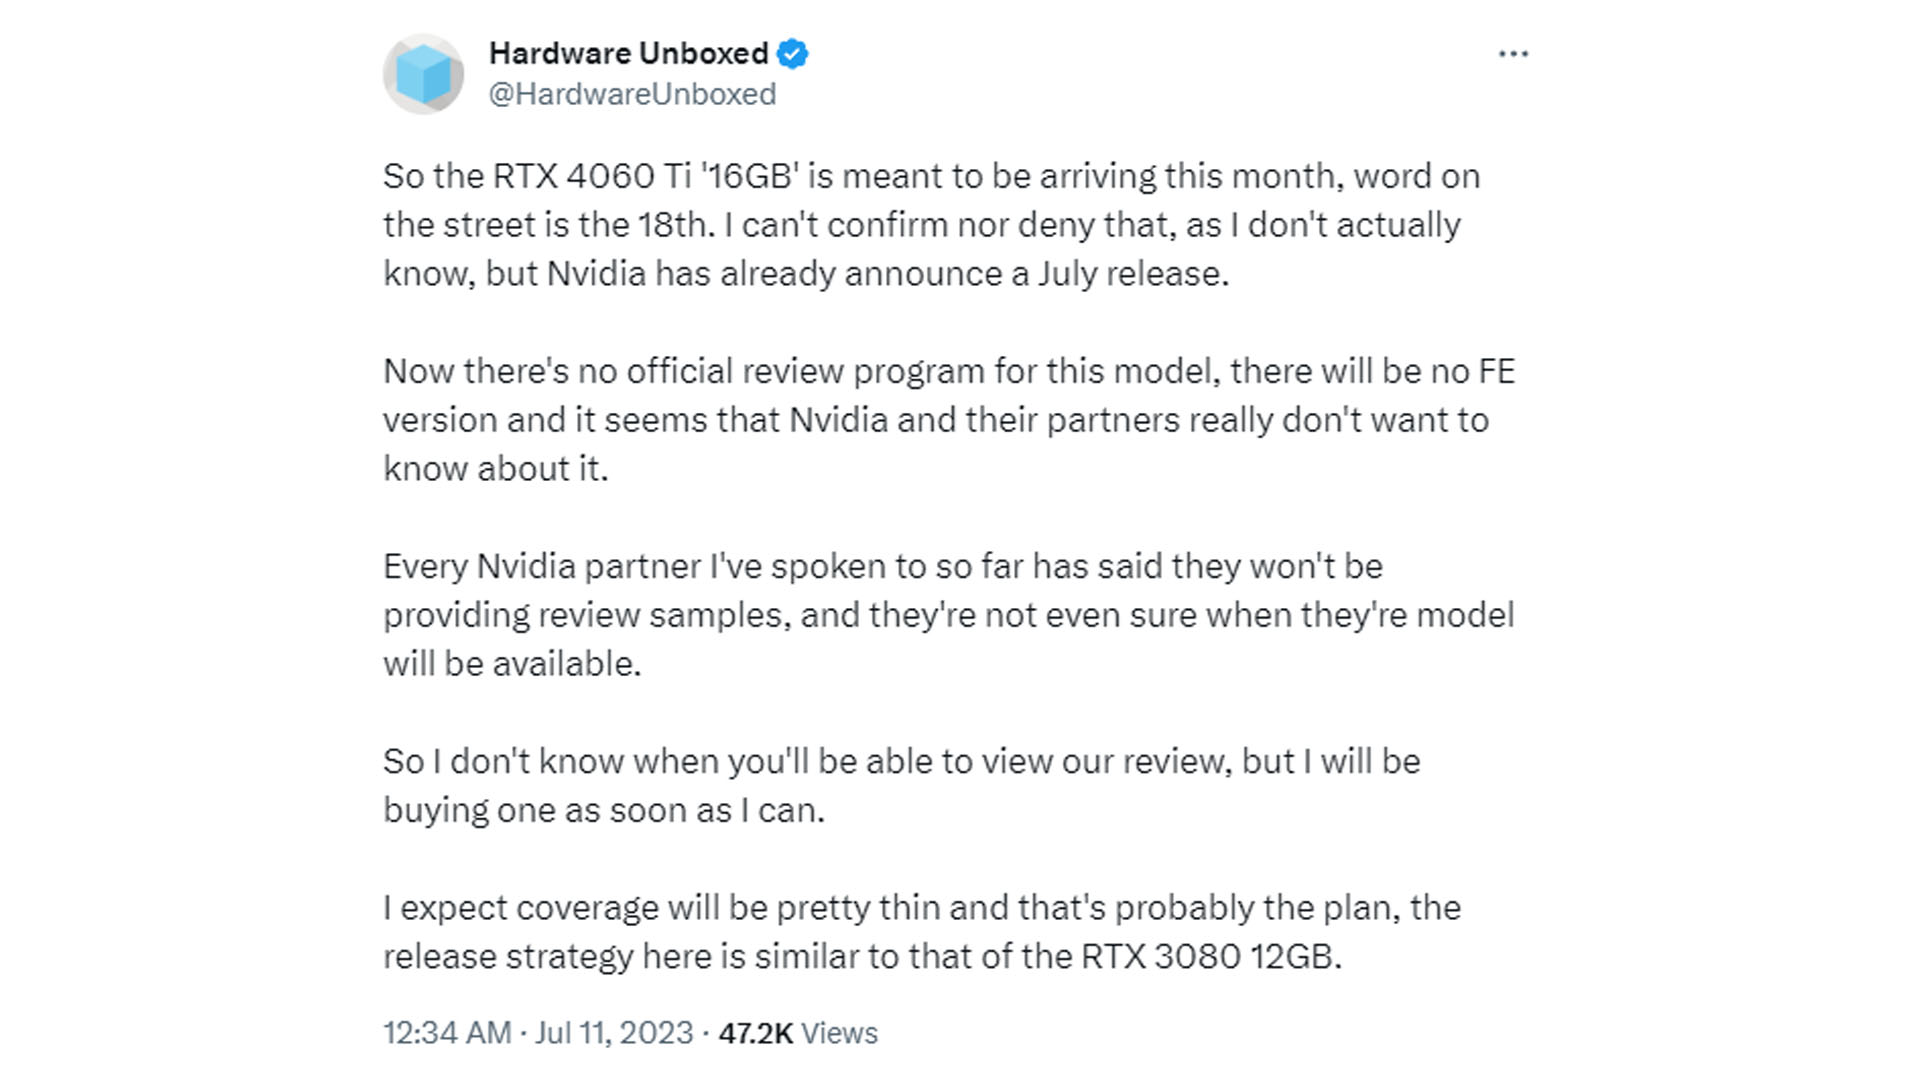 Hardware unboxed RTX 4060 Ti 16GB twitter quote "So the RTX 4060 Ti ’16GB’ is meant to be arriving this month, word on the street is the 18th. I can’t confirm nor deny that, as I don’t actually know, but Nvidia has already announced a July release. Now there’s no official review program for this model, there will be no FE version and it seems that Nvidia and their partners really don’t want to know about it. Every Nvidia partner I’ve spoken to so far has said they won’t be providing review samples, and they’re not even sure when they’re model will be available. So I don’t know when you’ll be able to view our review, but I will be buying one as soon as I can. I expect coverage will be pretty thin and that’s probably the plan, the release strategy here is similar to that of the RTX 3080 12GB."